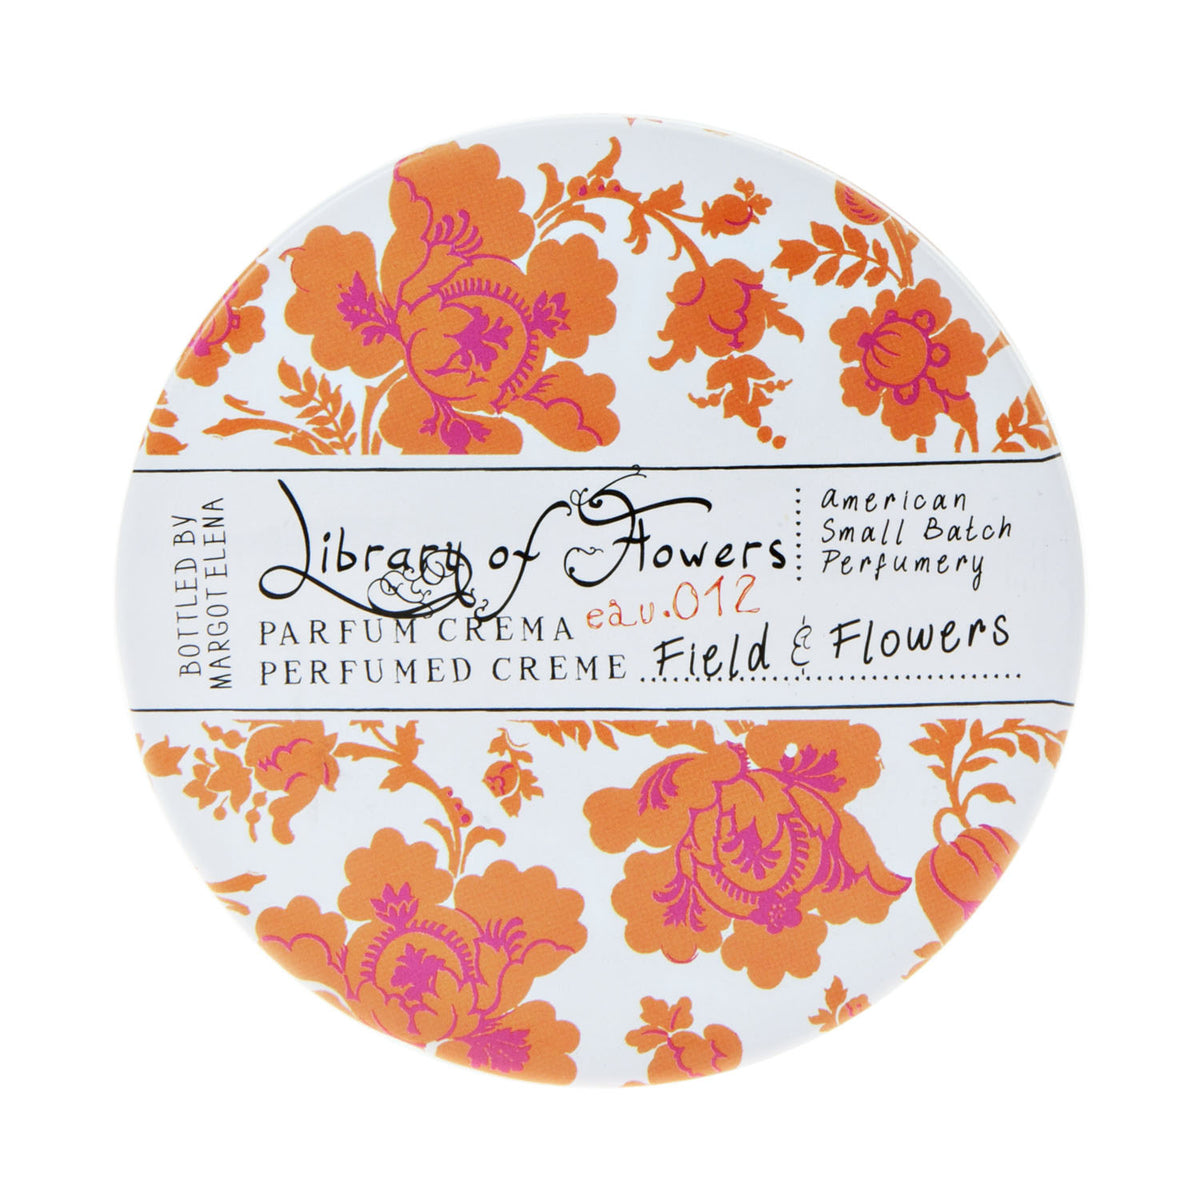 Round container of Library of Flowers Field & Flowers Parfum Crema with a floral pattern in orange and white, and text detailing the Margot Elena product name and characteristics on the label.